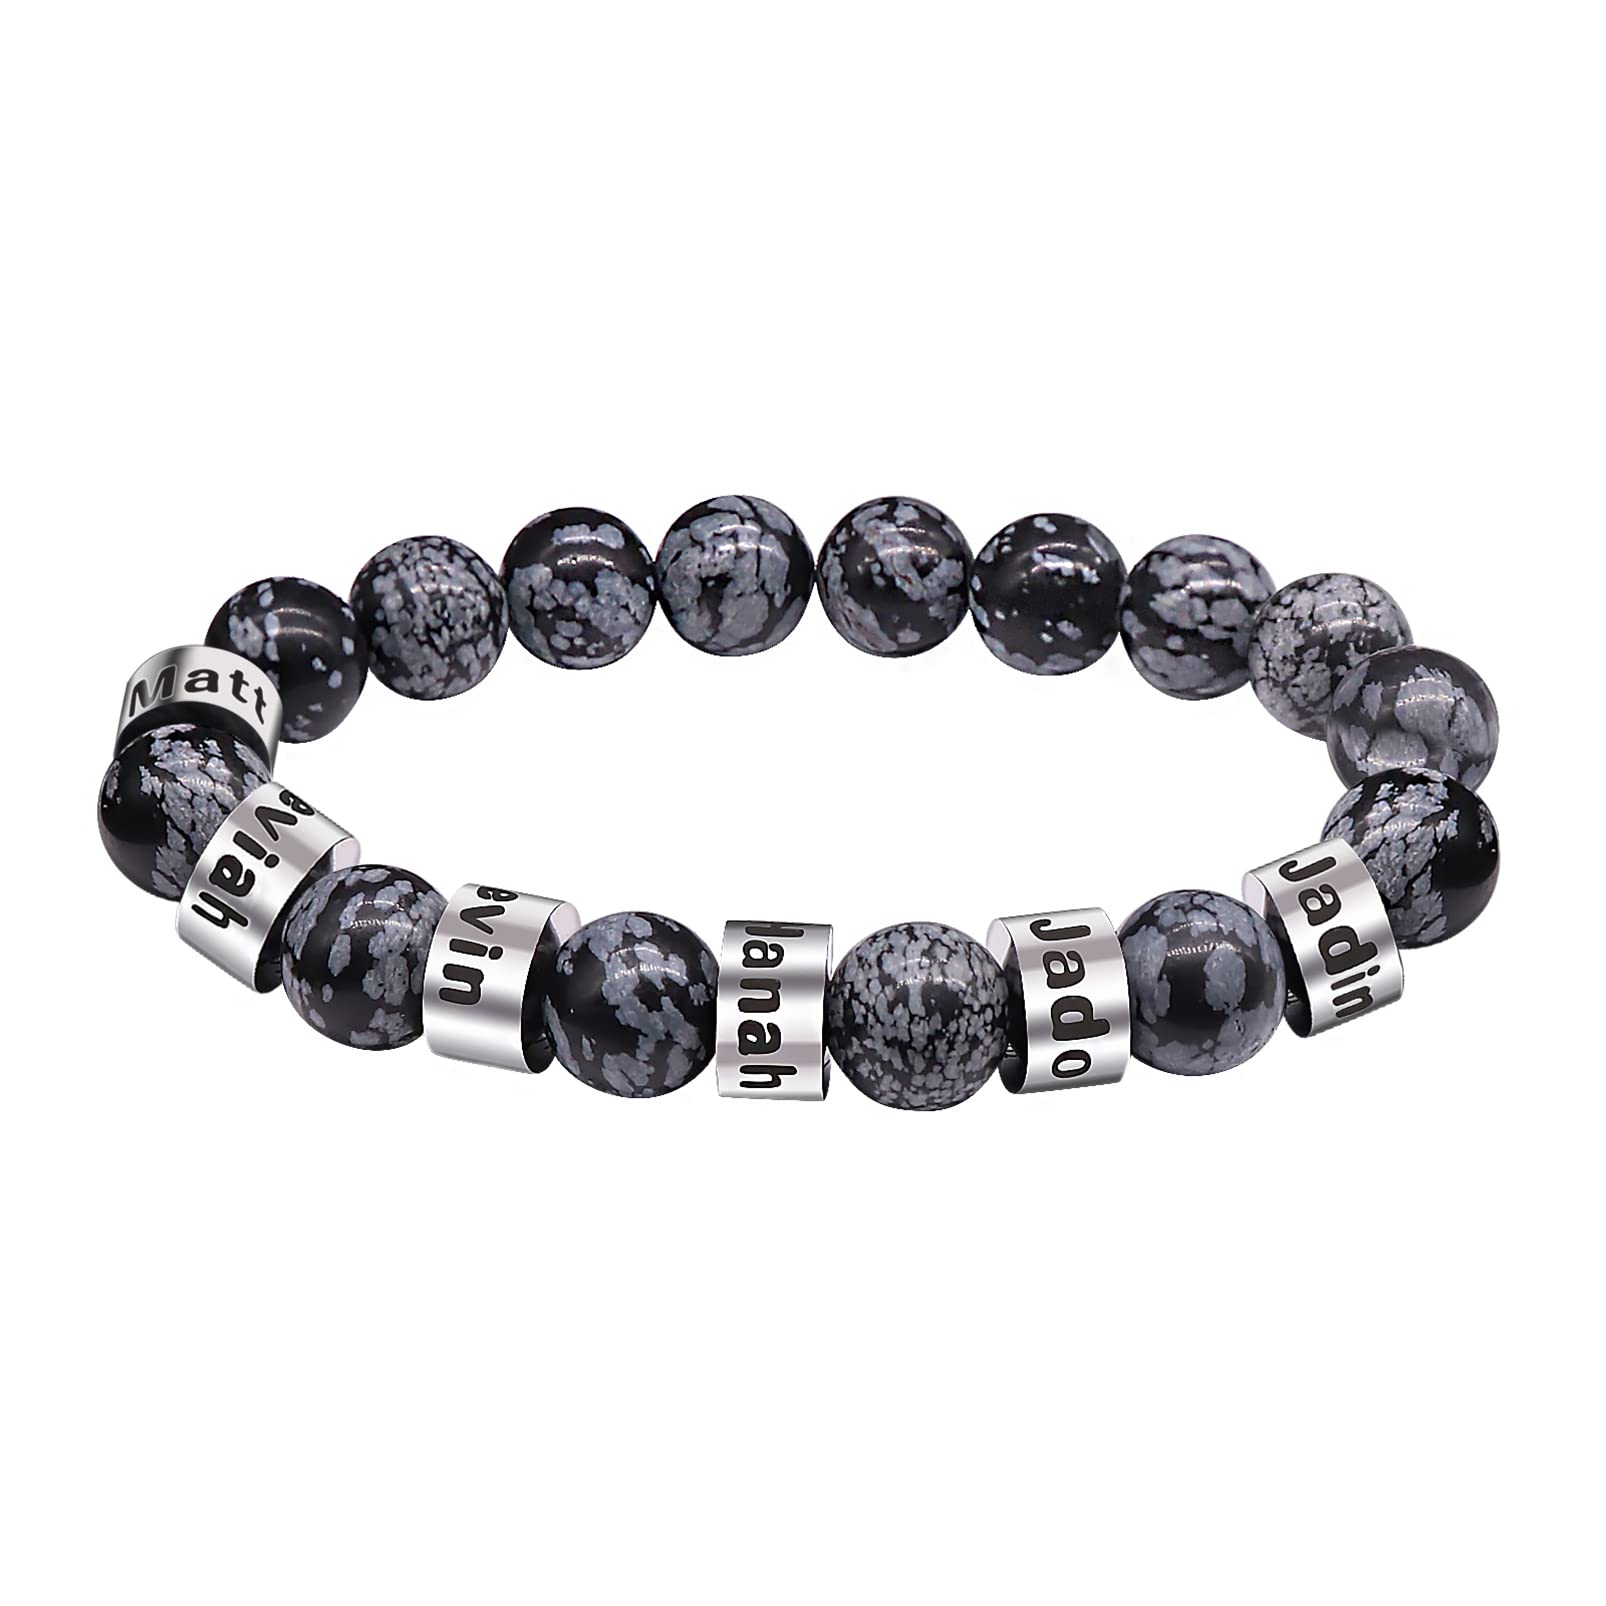 Personalized Stone Beads Bracelets with Name Lava Beads Engraved for Men